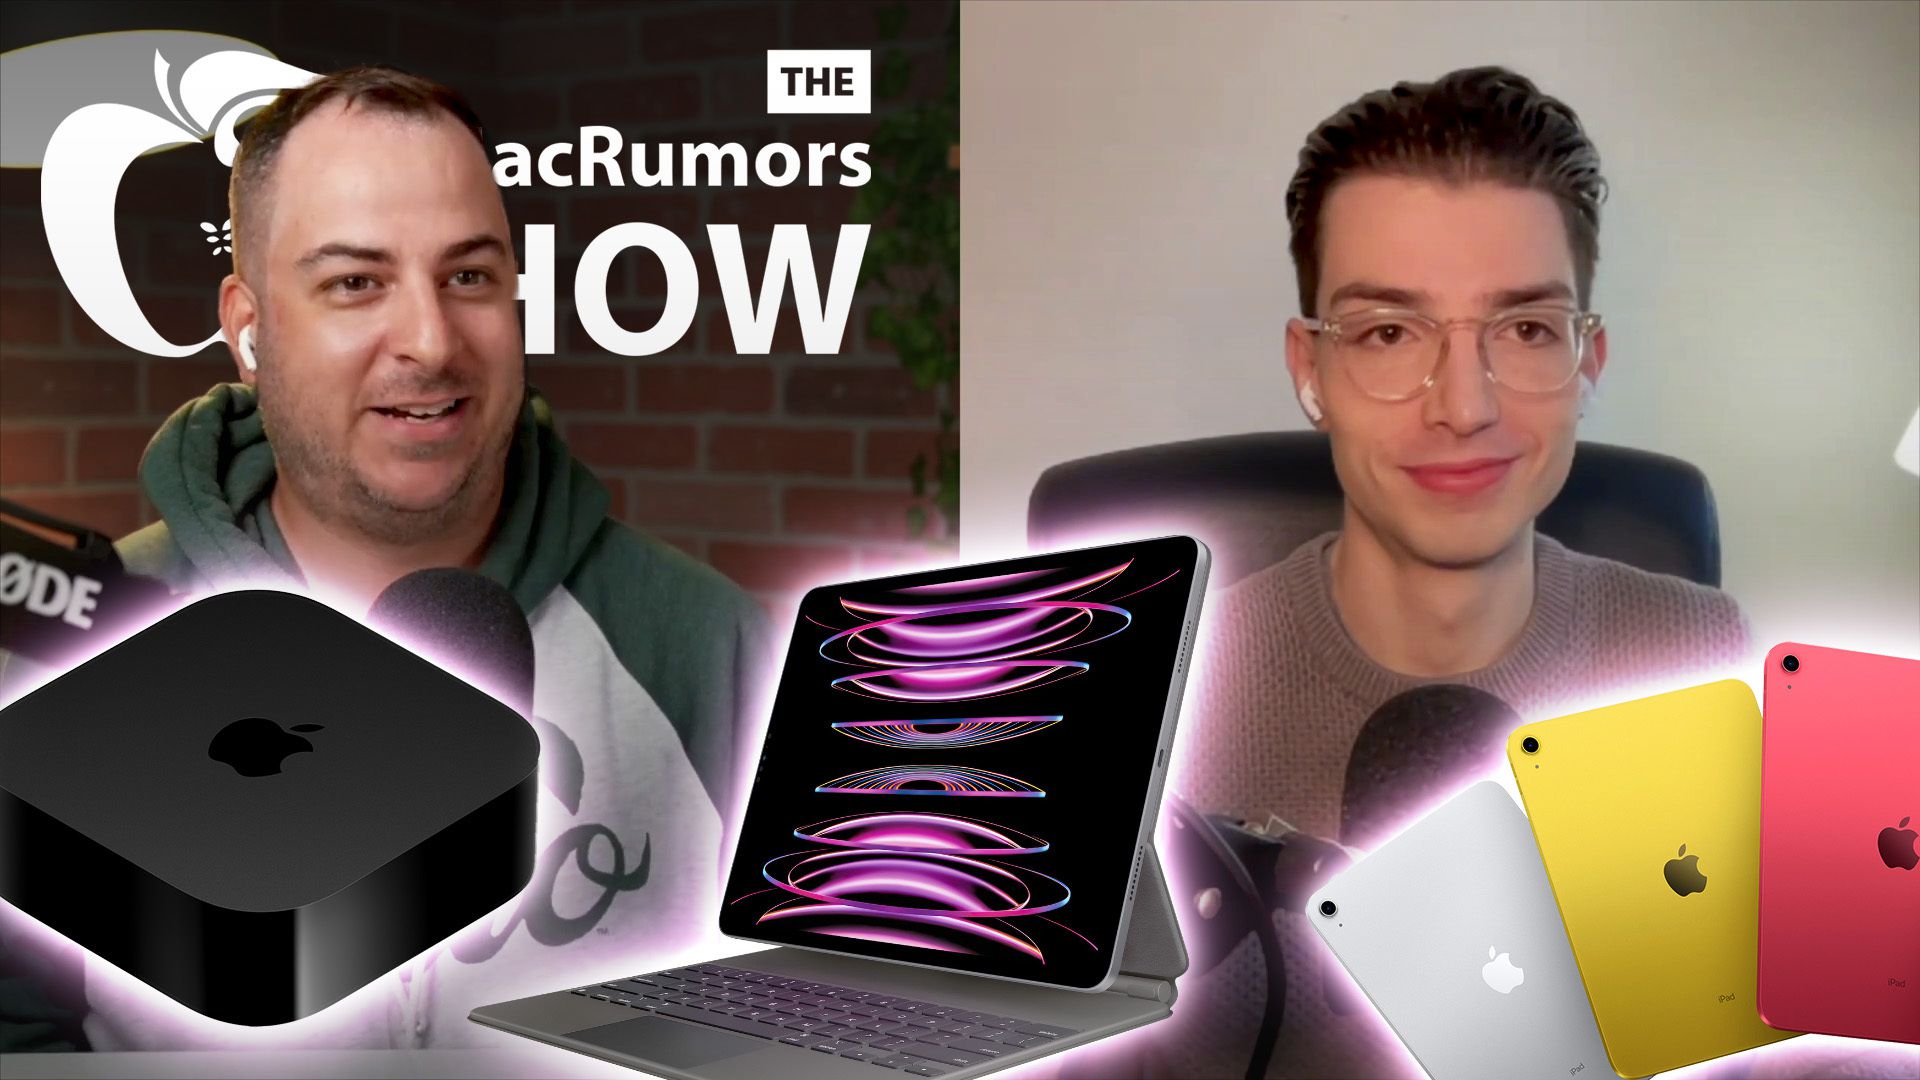 The MacRumors Show: Dissecting the New iPads and Apple TV